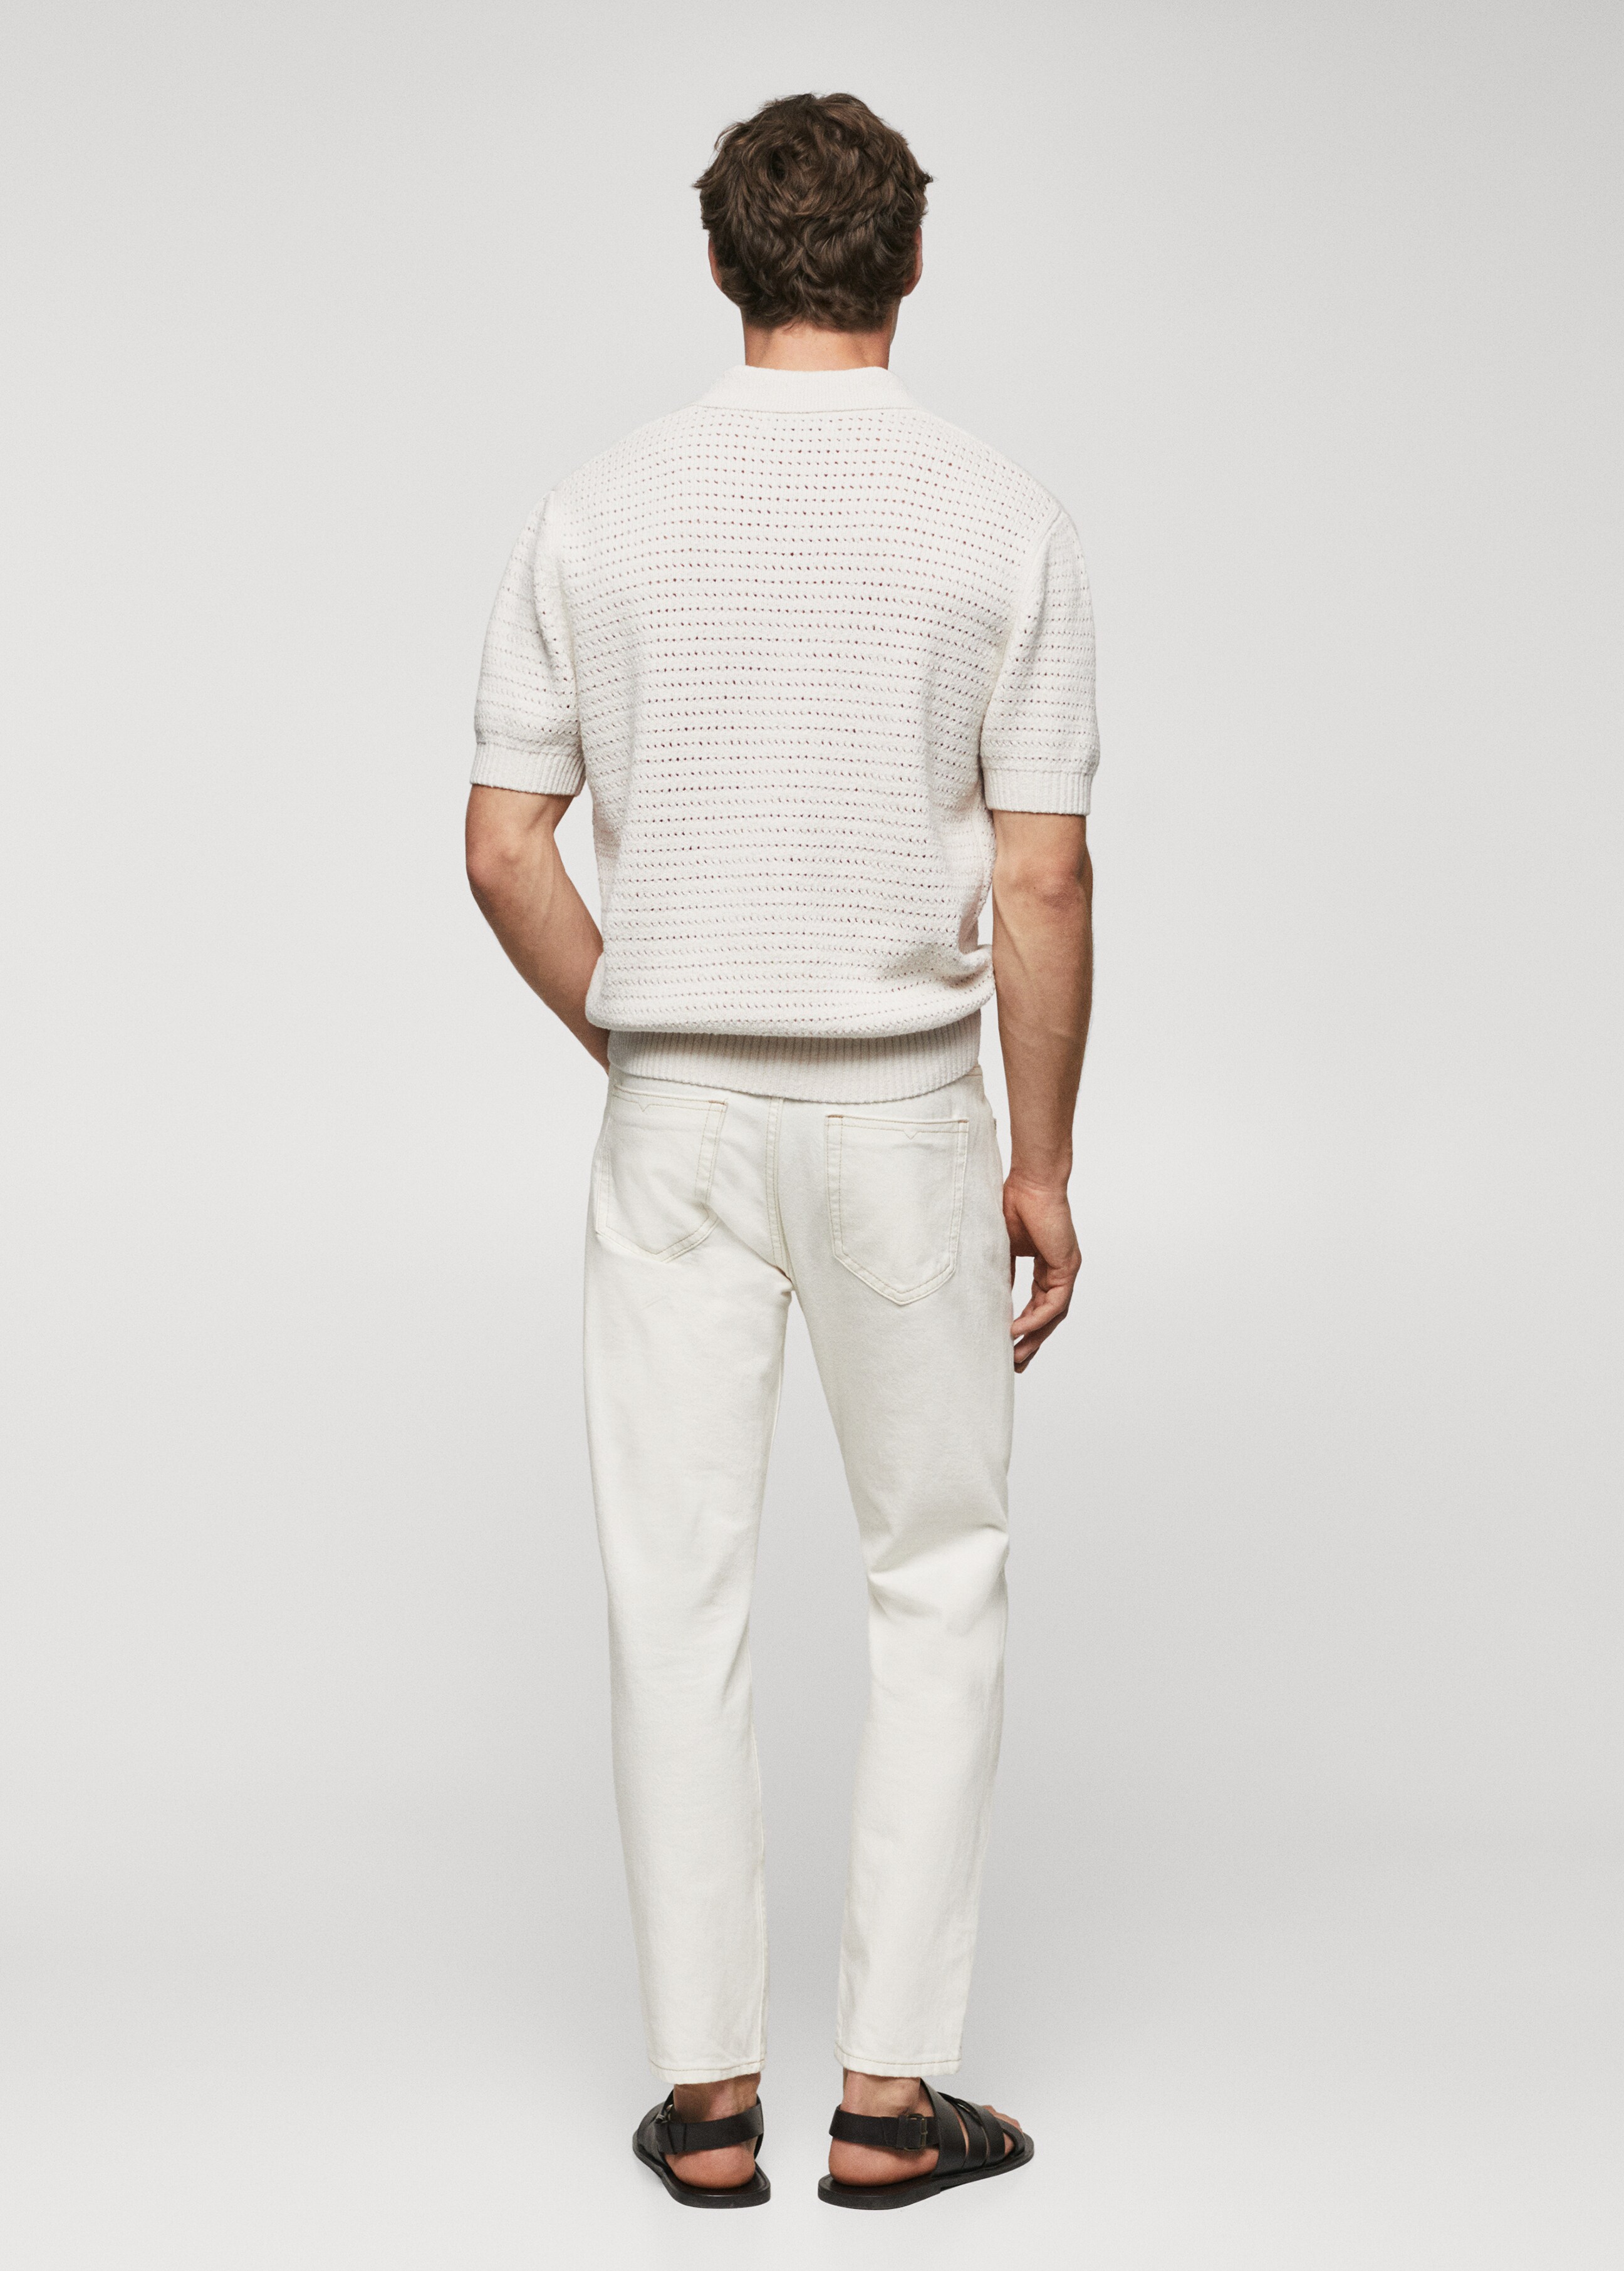 Openwork cotton knitte polo shirt  - Reverse of the article